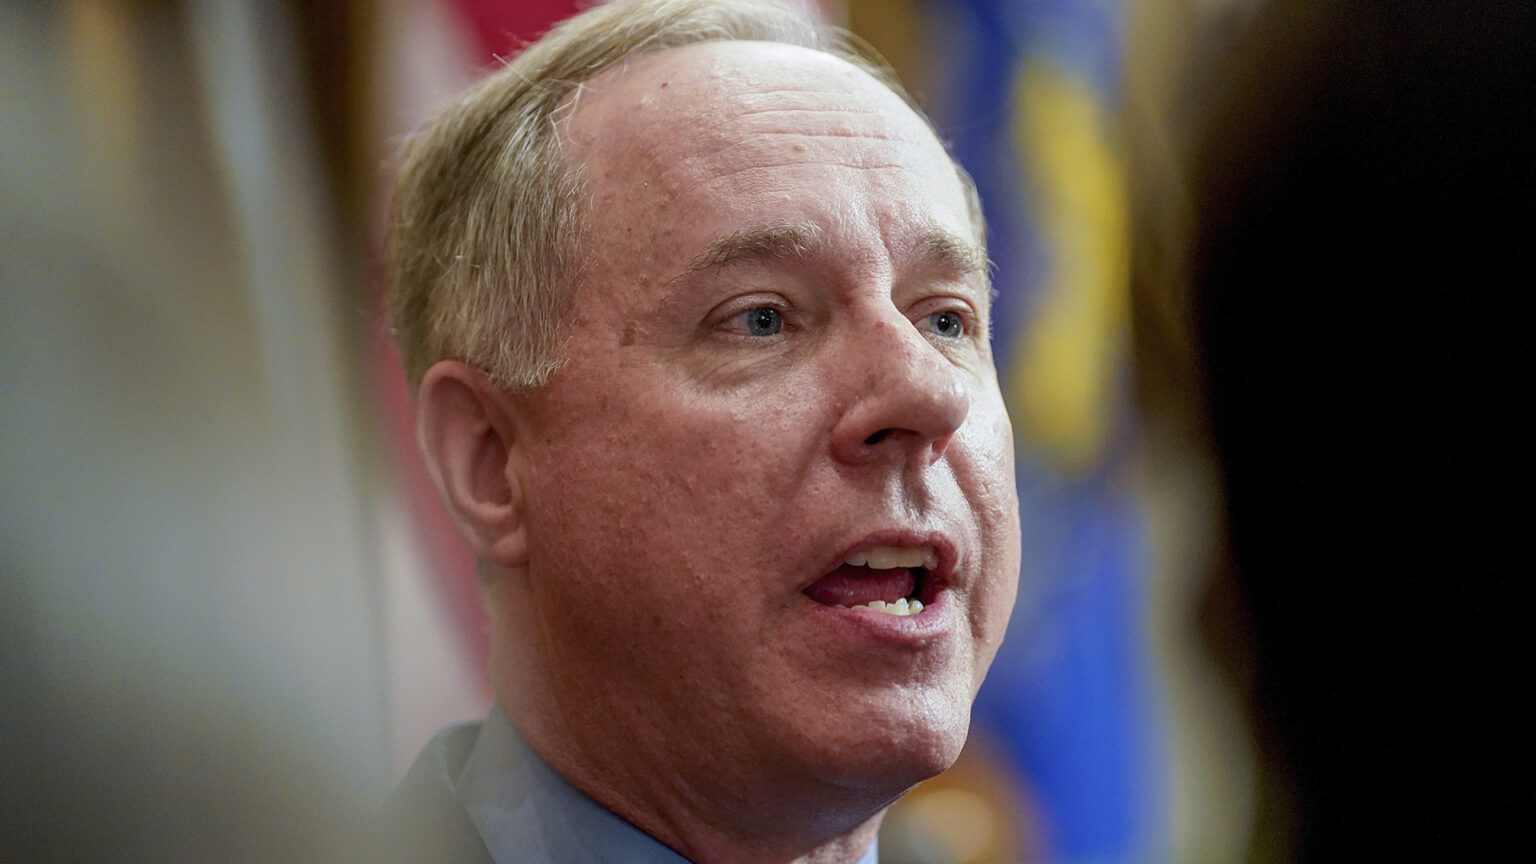 A close-up photo shows Robin Vos speaking with out-of-focus people in the foreground and flags in the background.